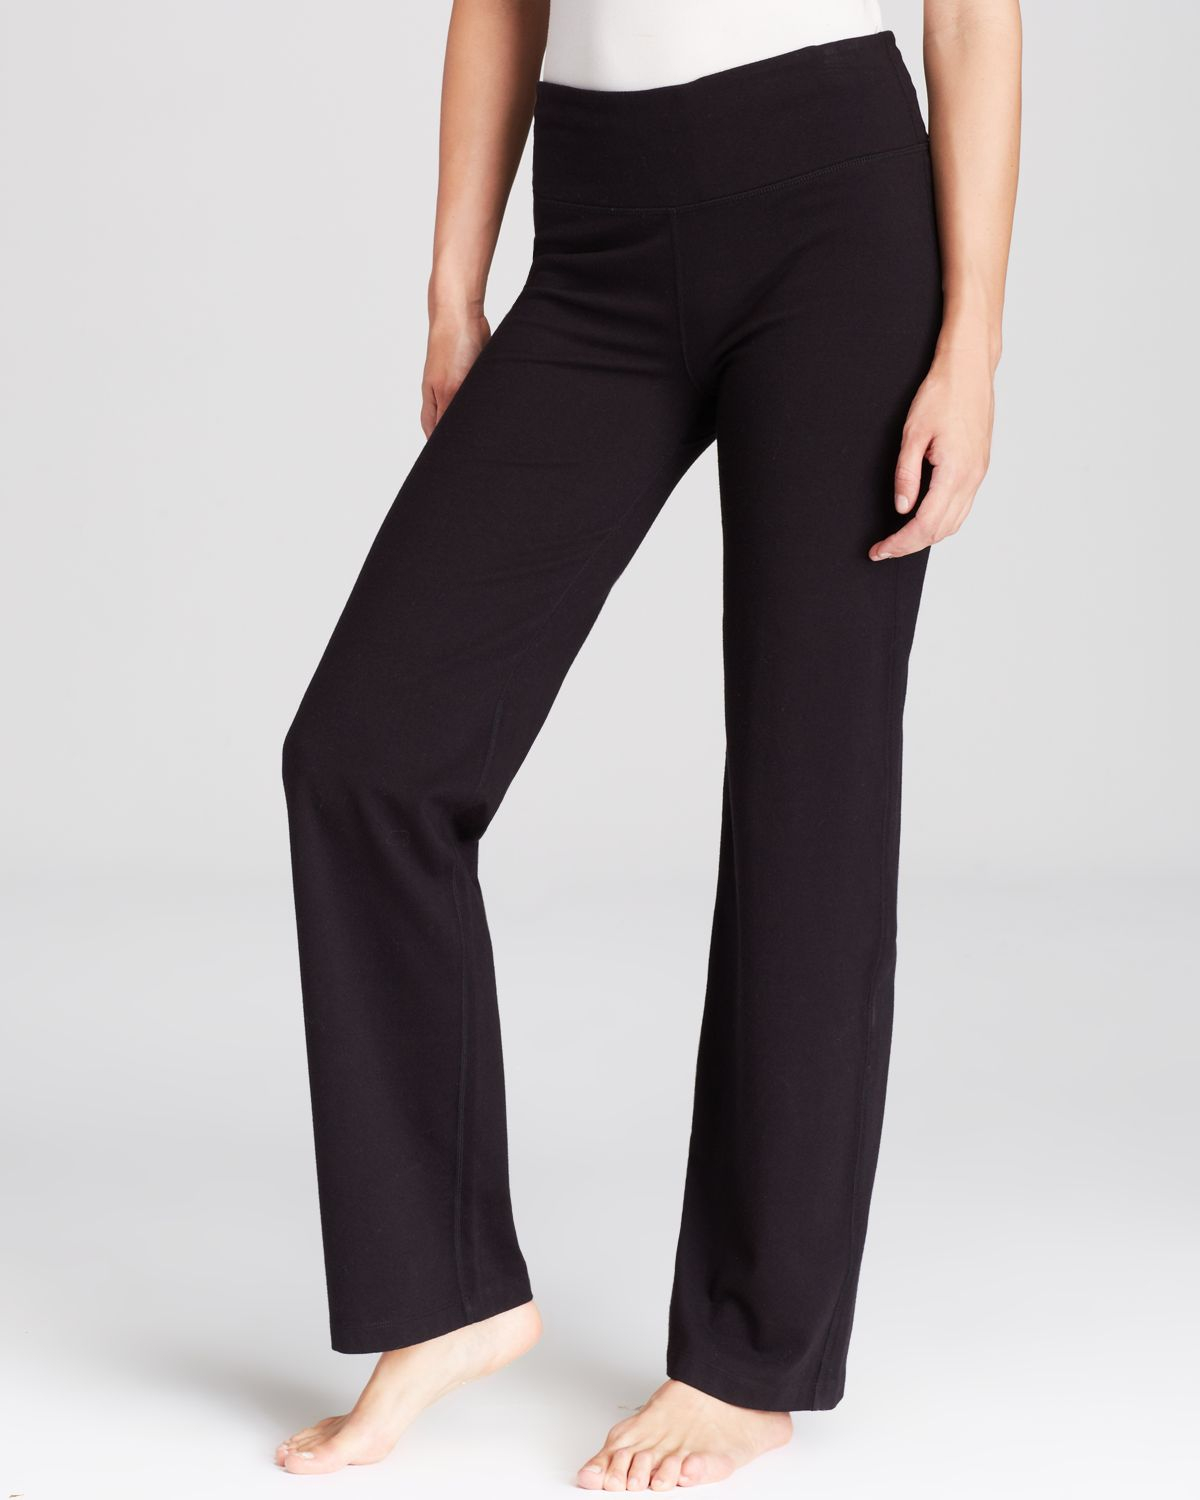 Lyst - Two By Vince Camuto Wide Leg Yoga Pants in Black